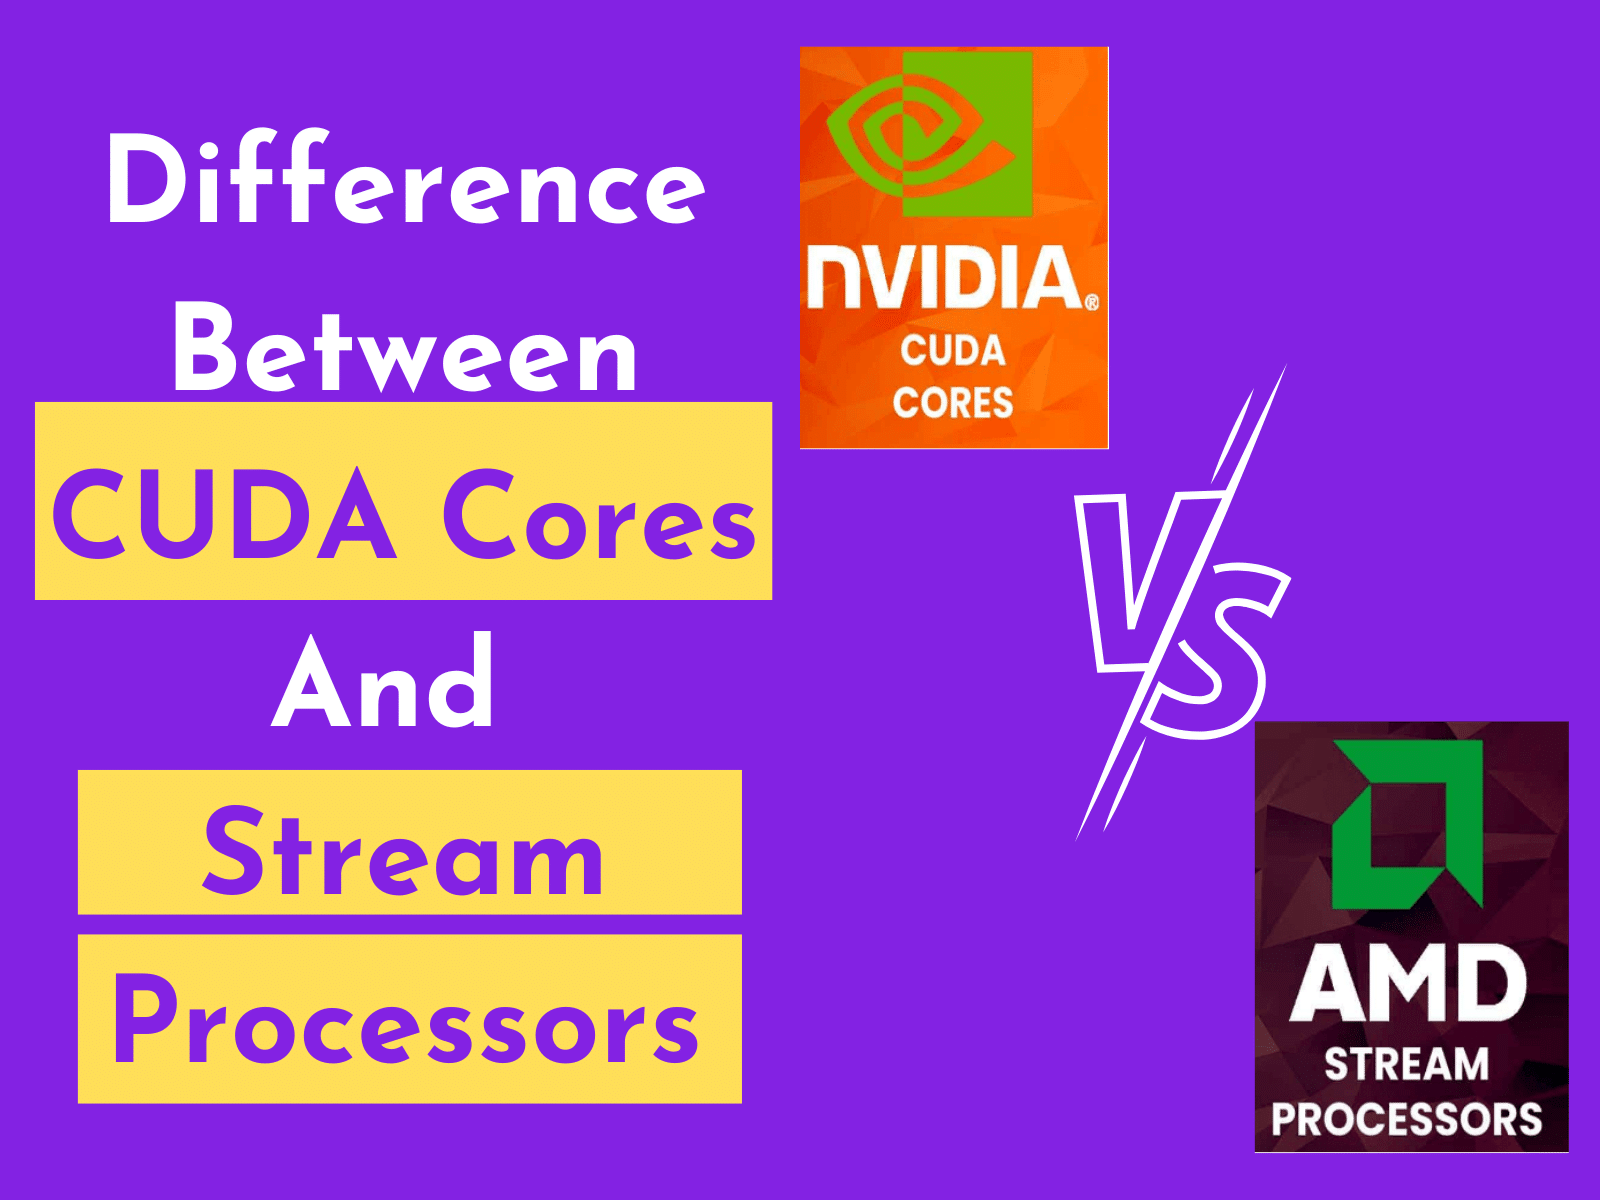 Difference Between CUDA Cores And Stream Processors.
